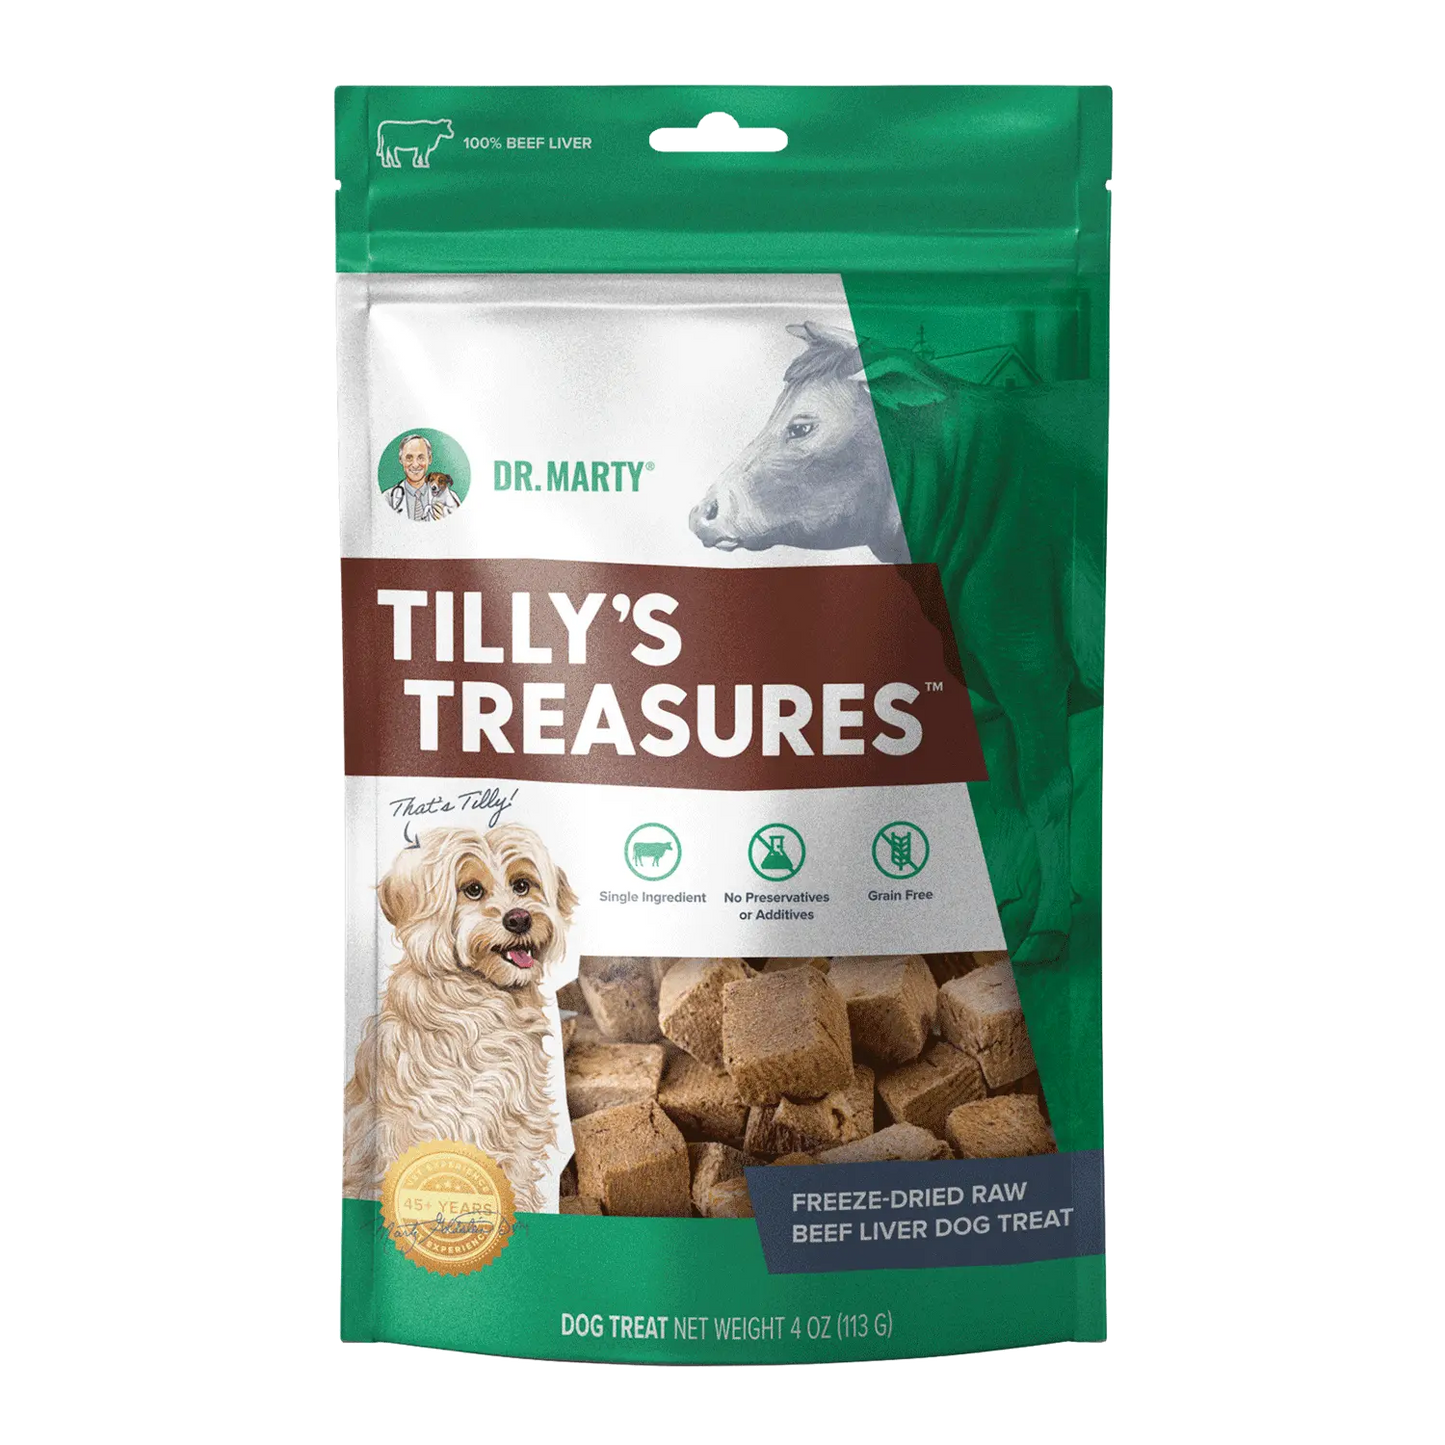 Dr. Marty Tilly's Treasures Beef Liver Dog Treat 4oz Dr. Marty